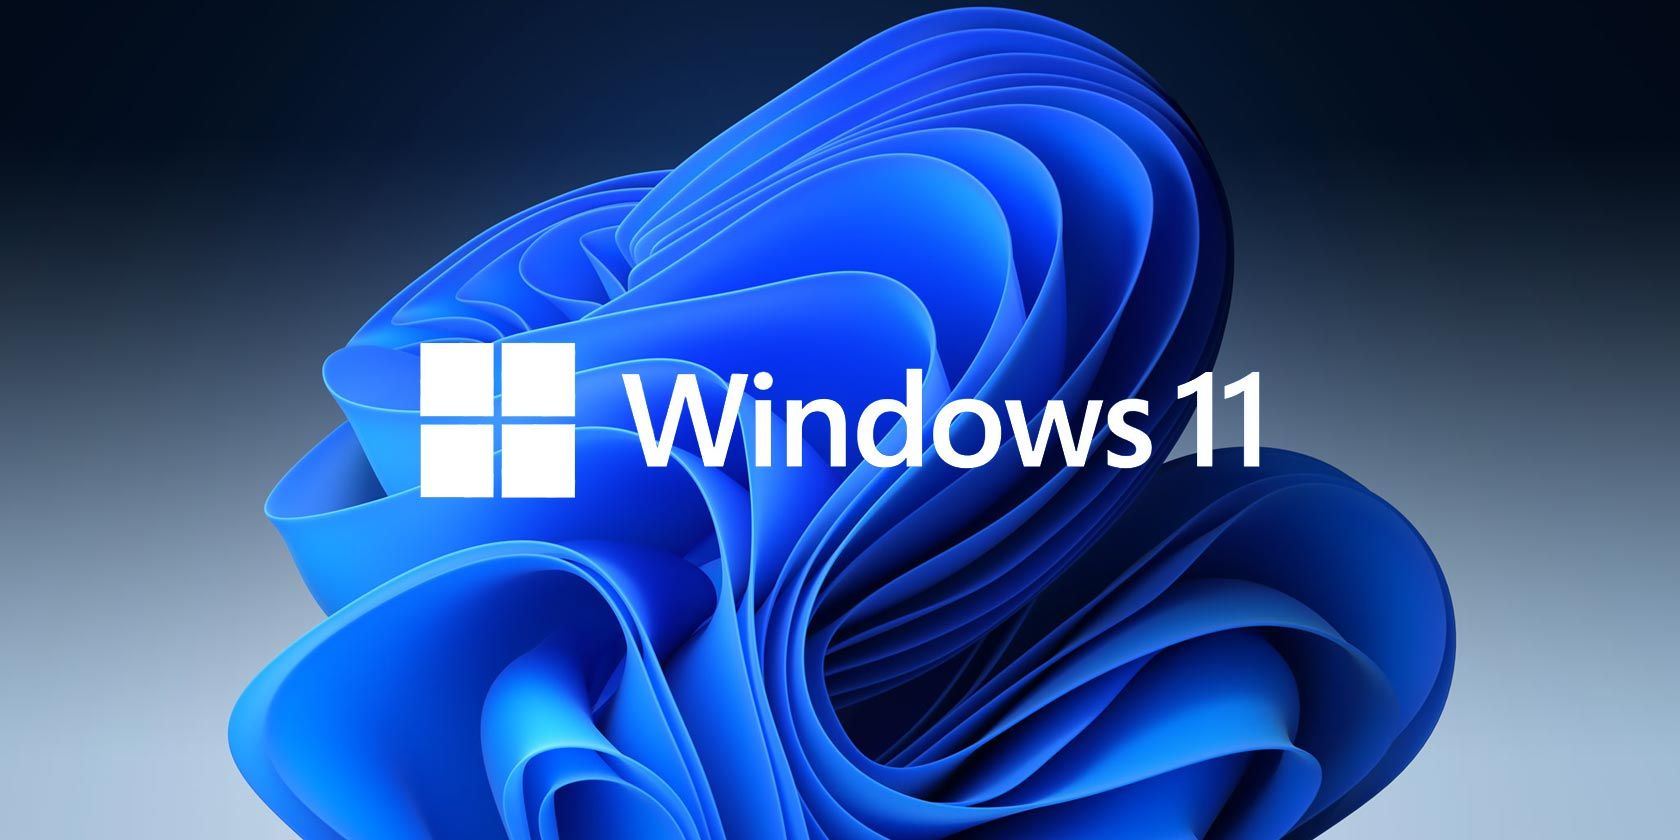 What Are the Pros and Cons of Windows 11?